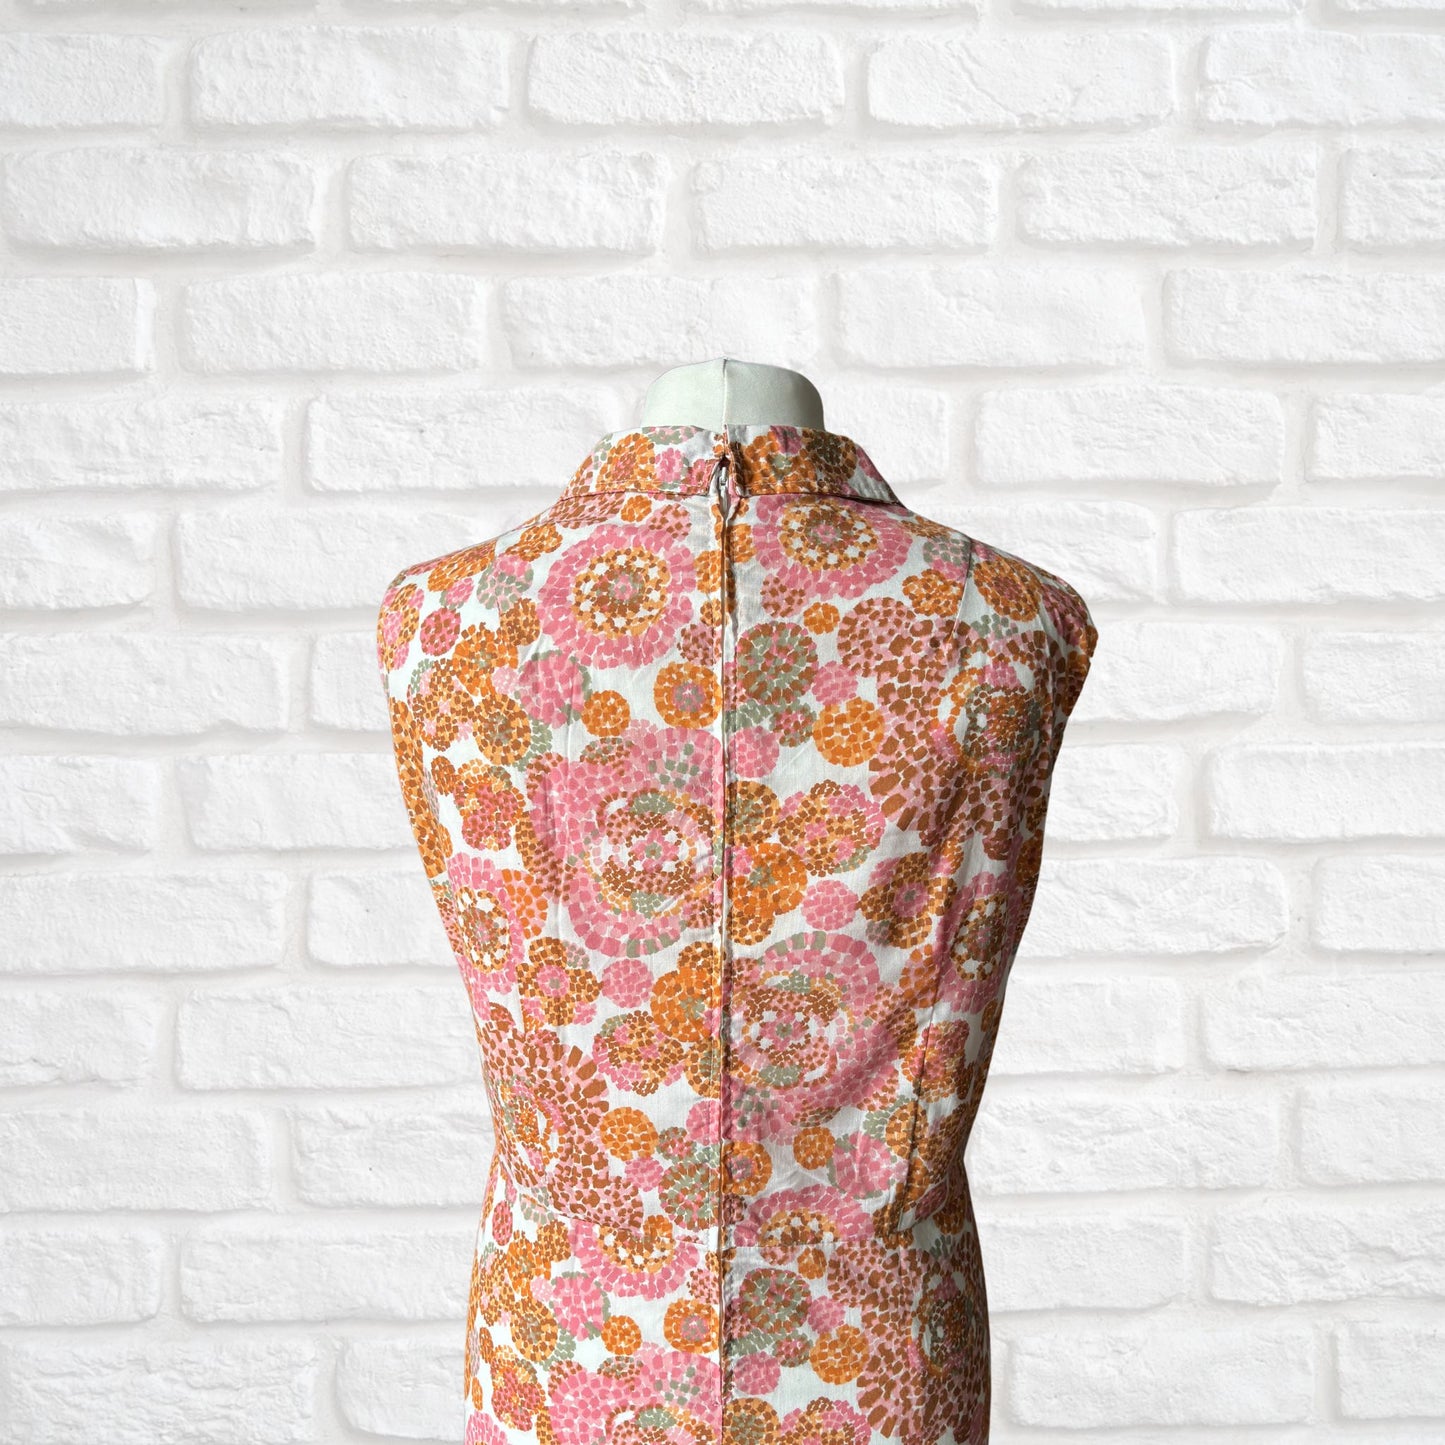 60s Abstract Floral Print, Cotton Blend Vintage Summer Dress. Approx UK size 18-20